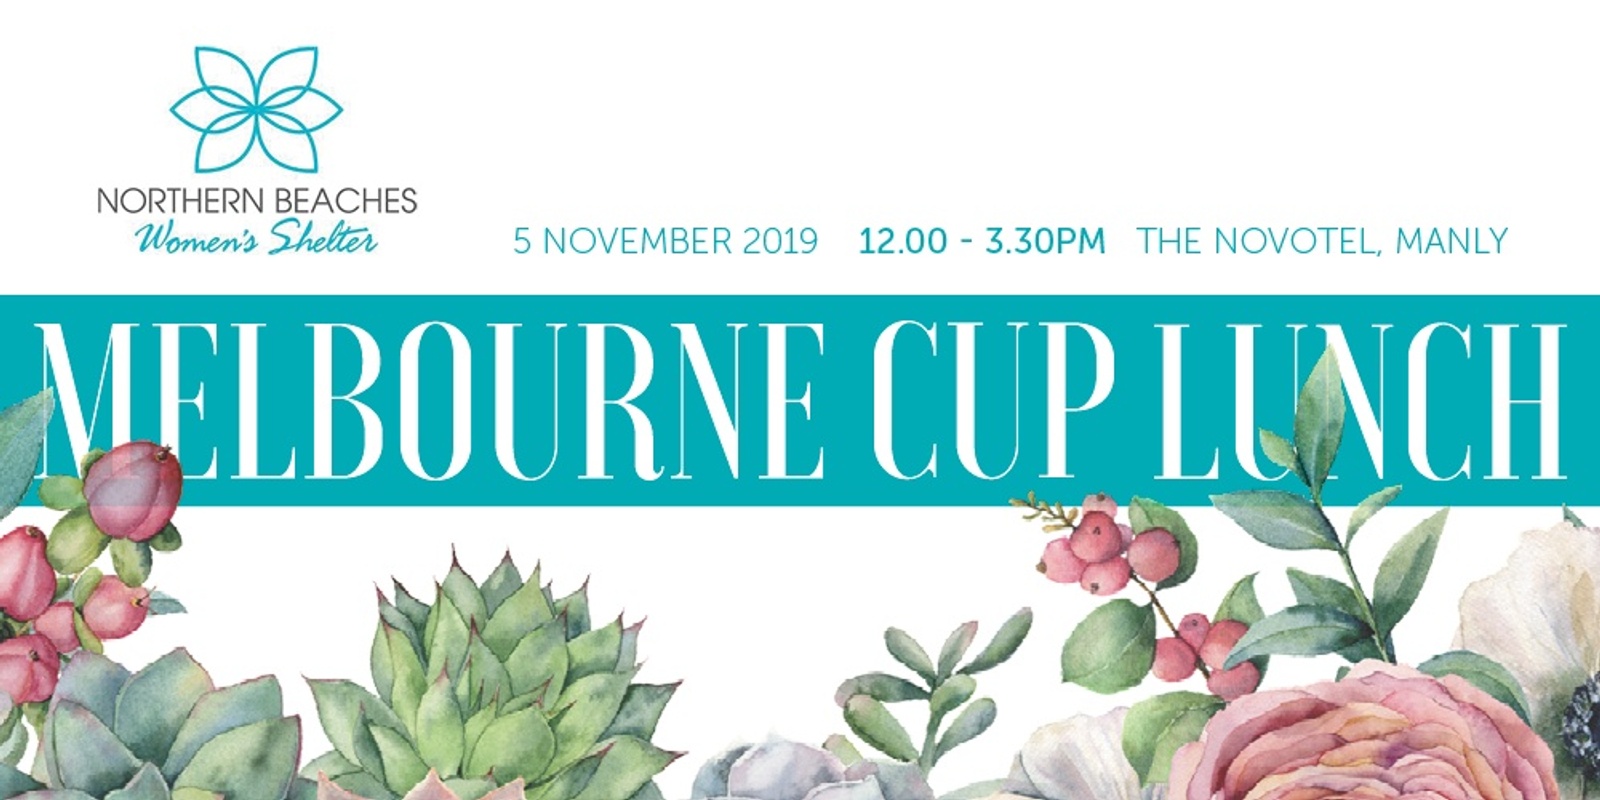 Banner image for The Northern Beaches Woman's Shelter Melbourne Cup Lunch 2019